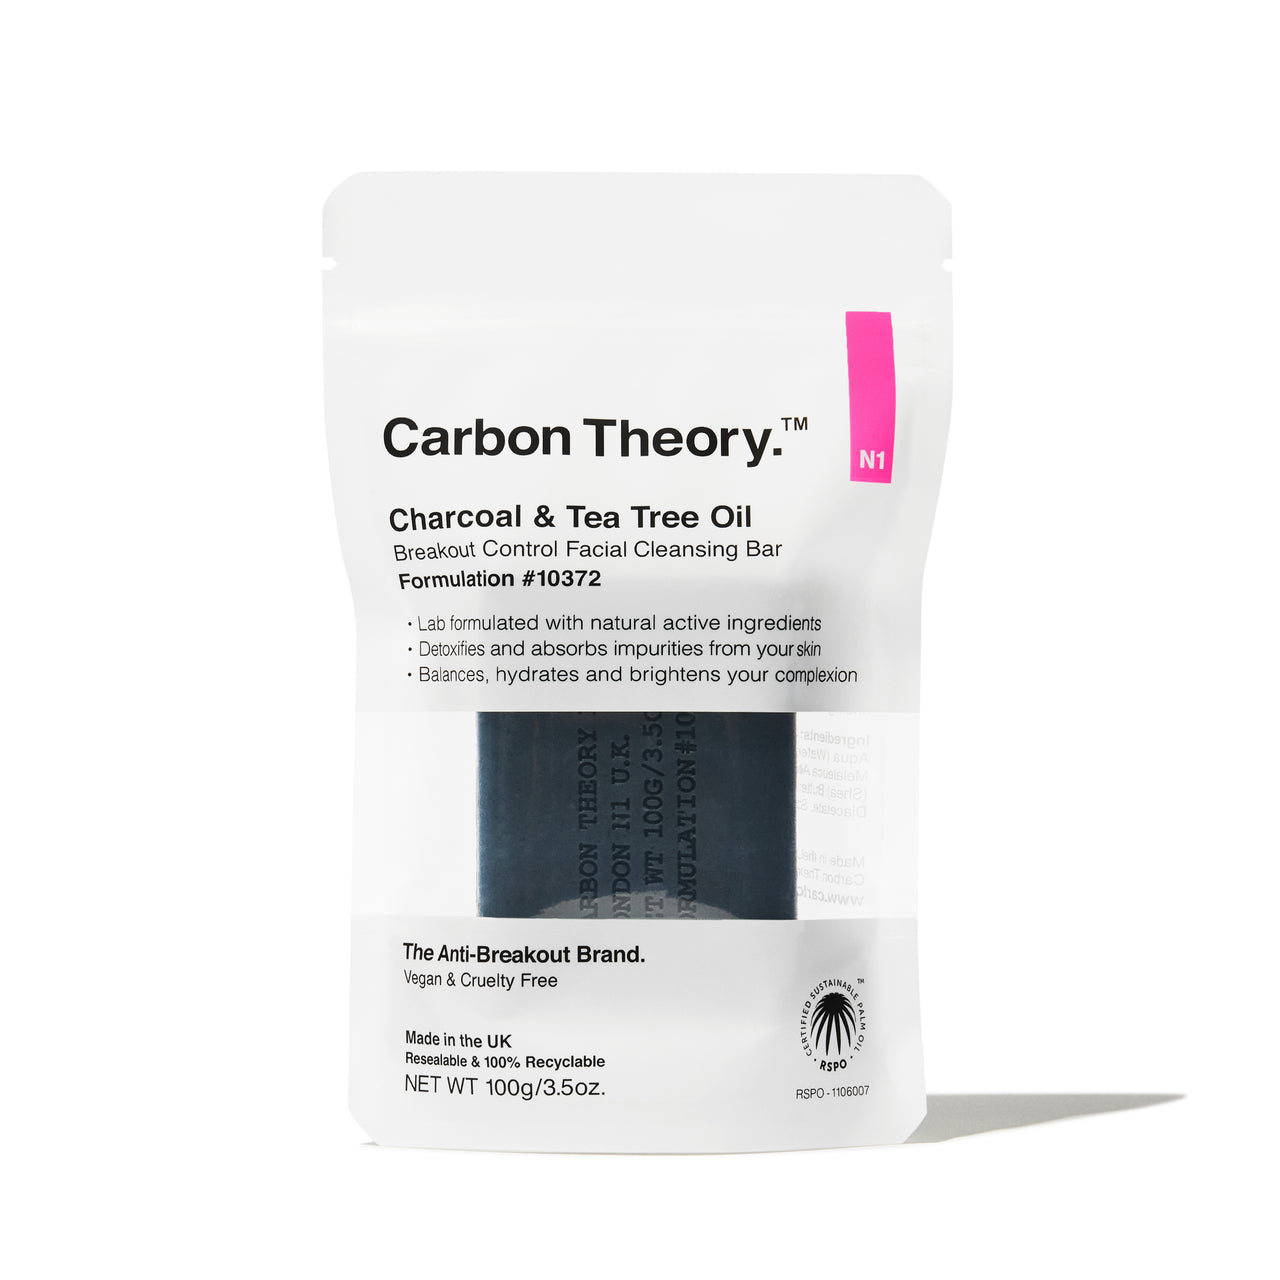 CARBON THEORY - CHARCOAL AND TEA TREE OIL FACIAL CLEANSING BAR